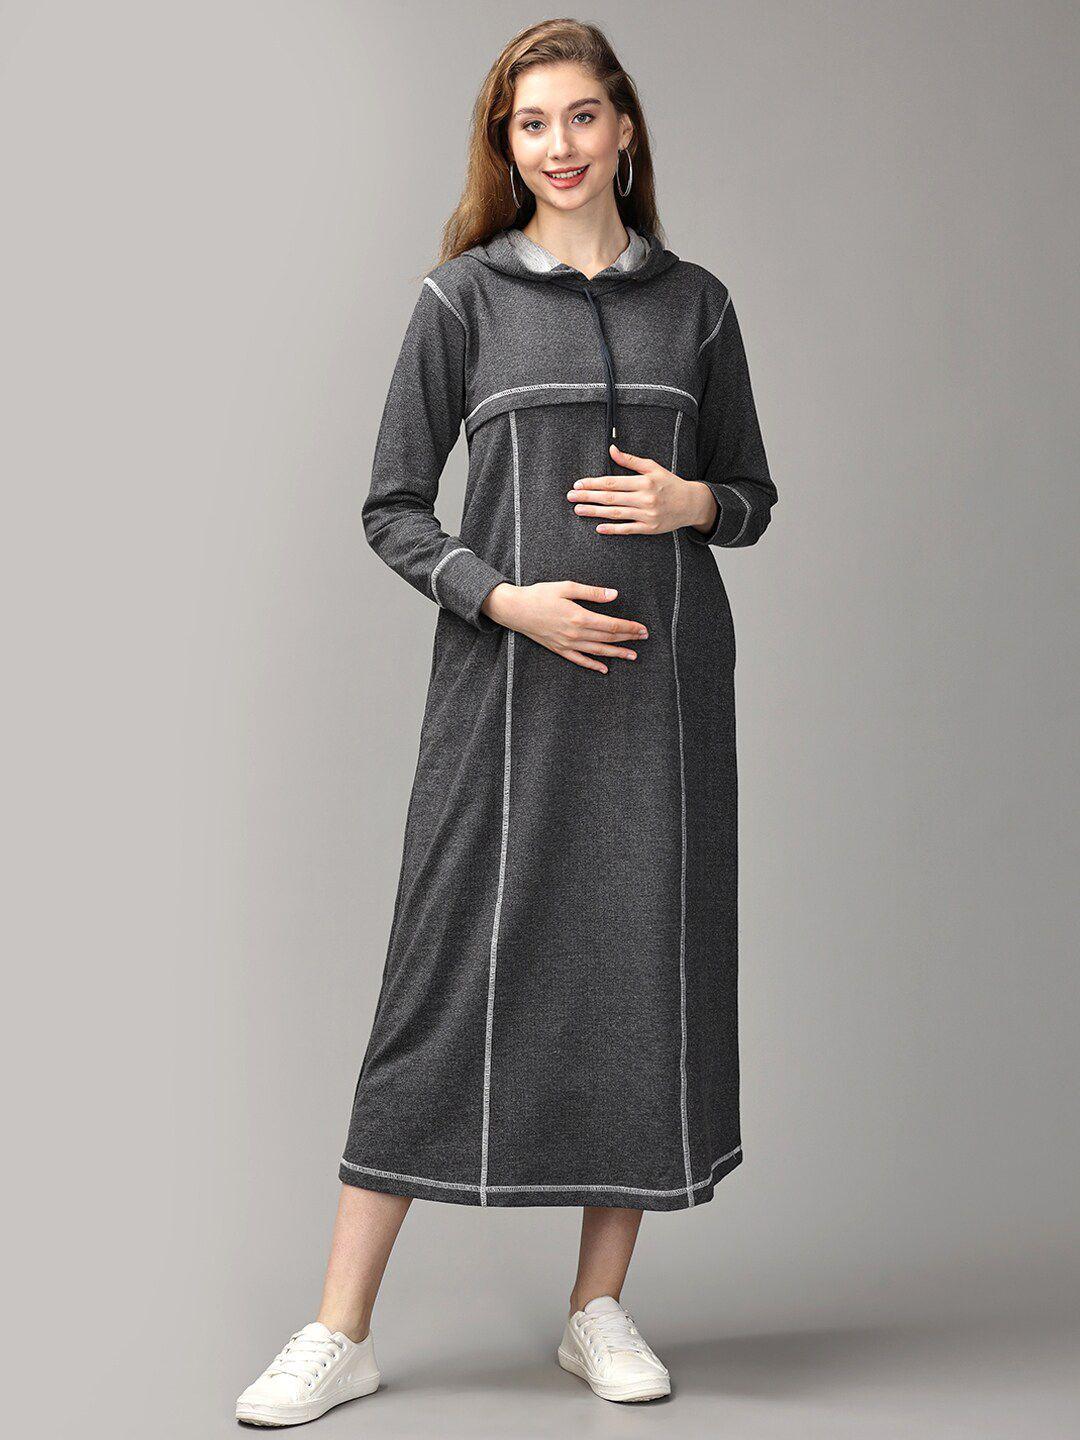 The Mom Store Maternity Hooded Cotton A-Line Midi Dress